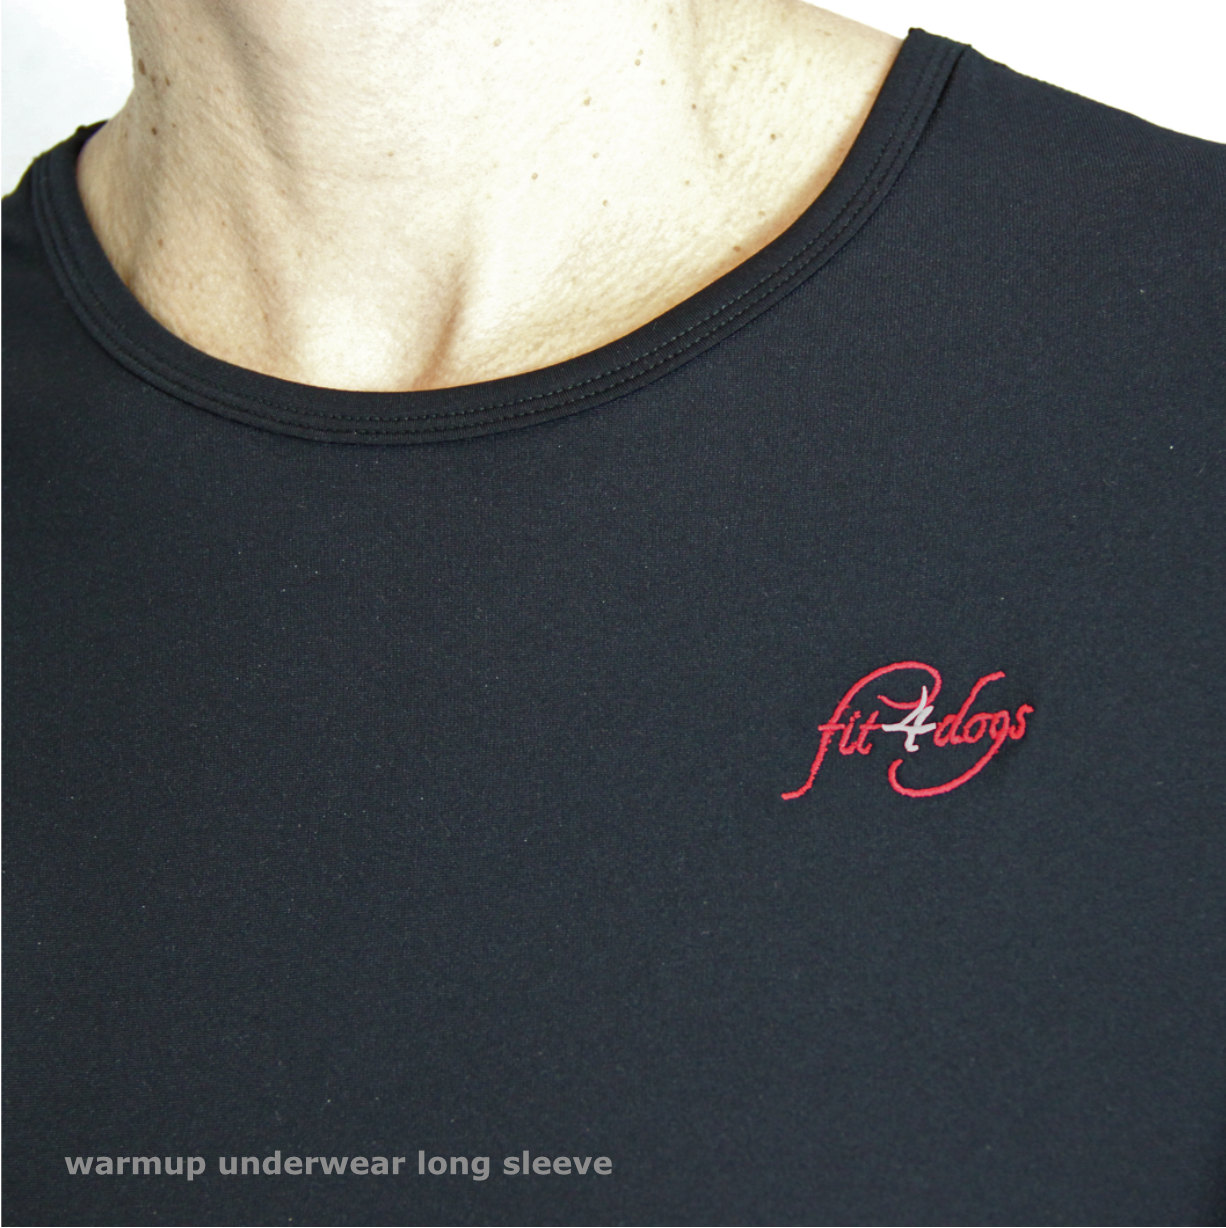 warmup underwear long sleeve embroidery